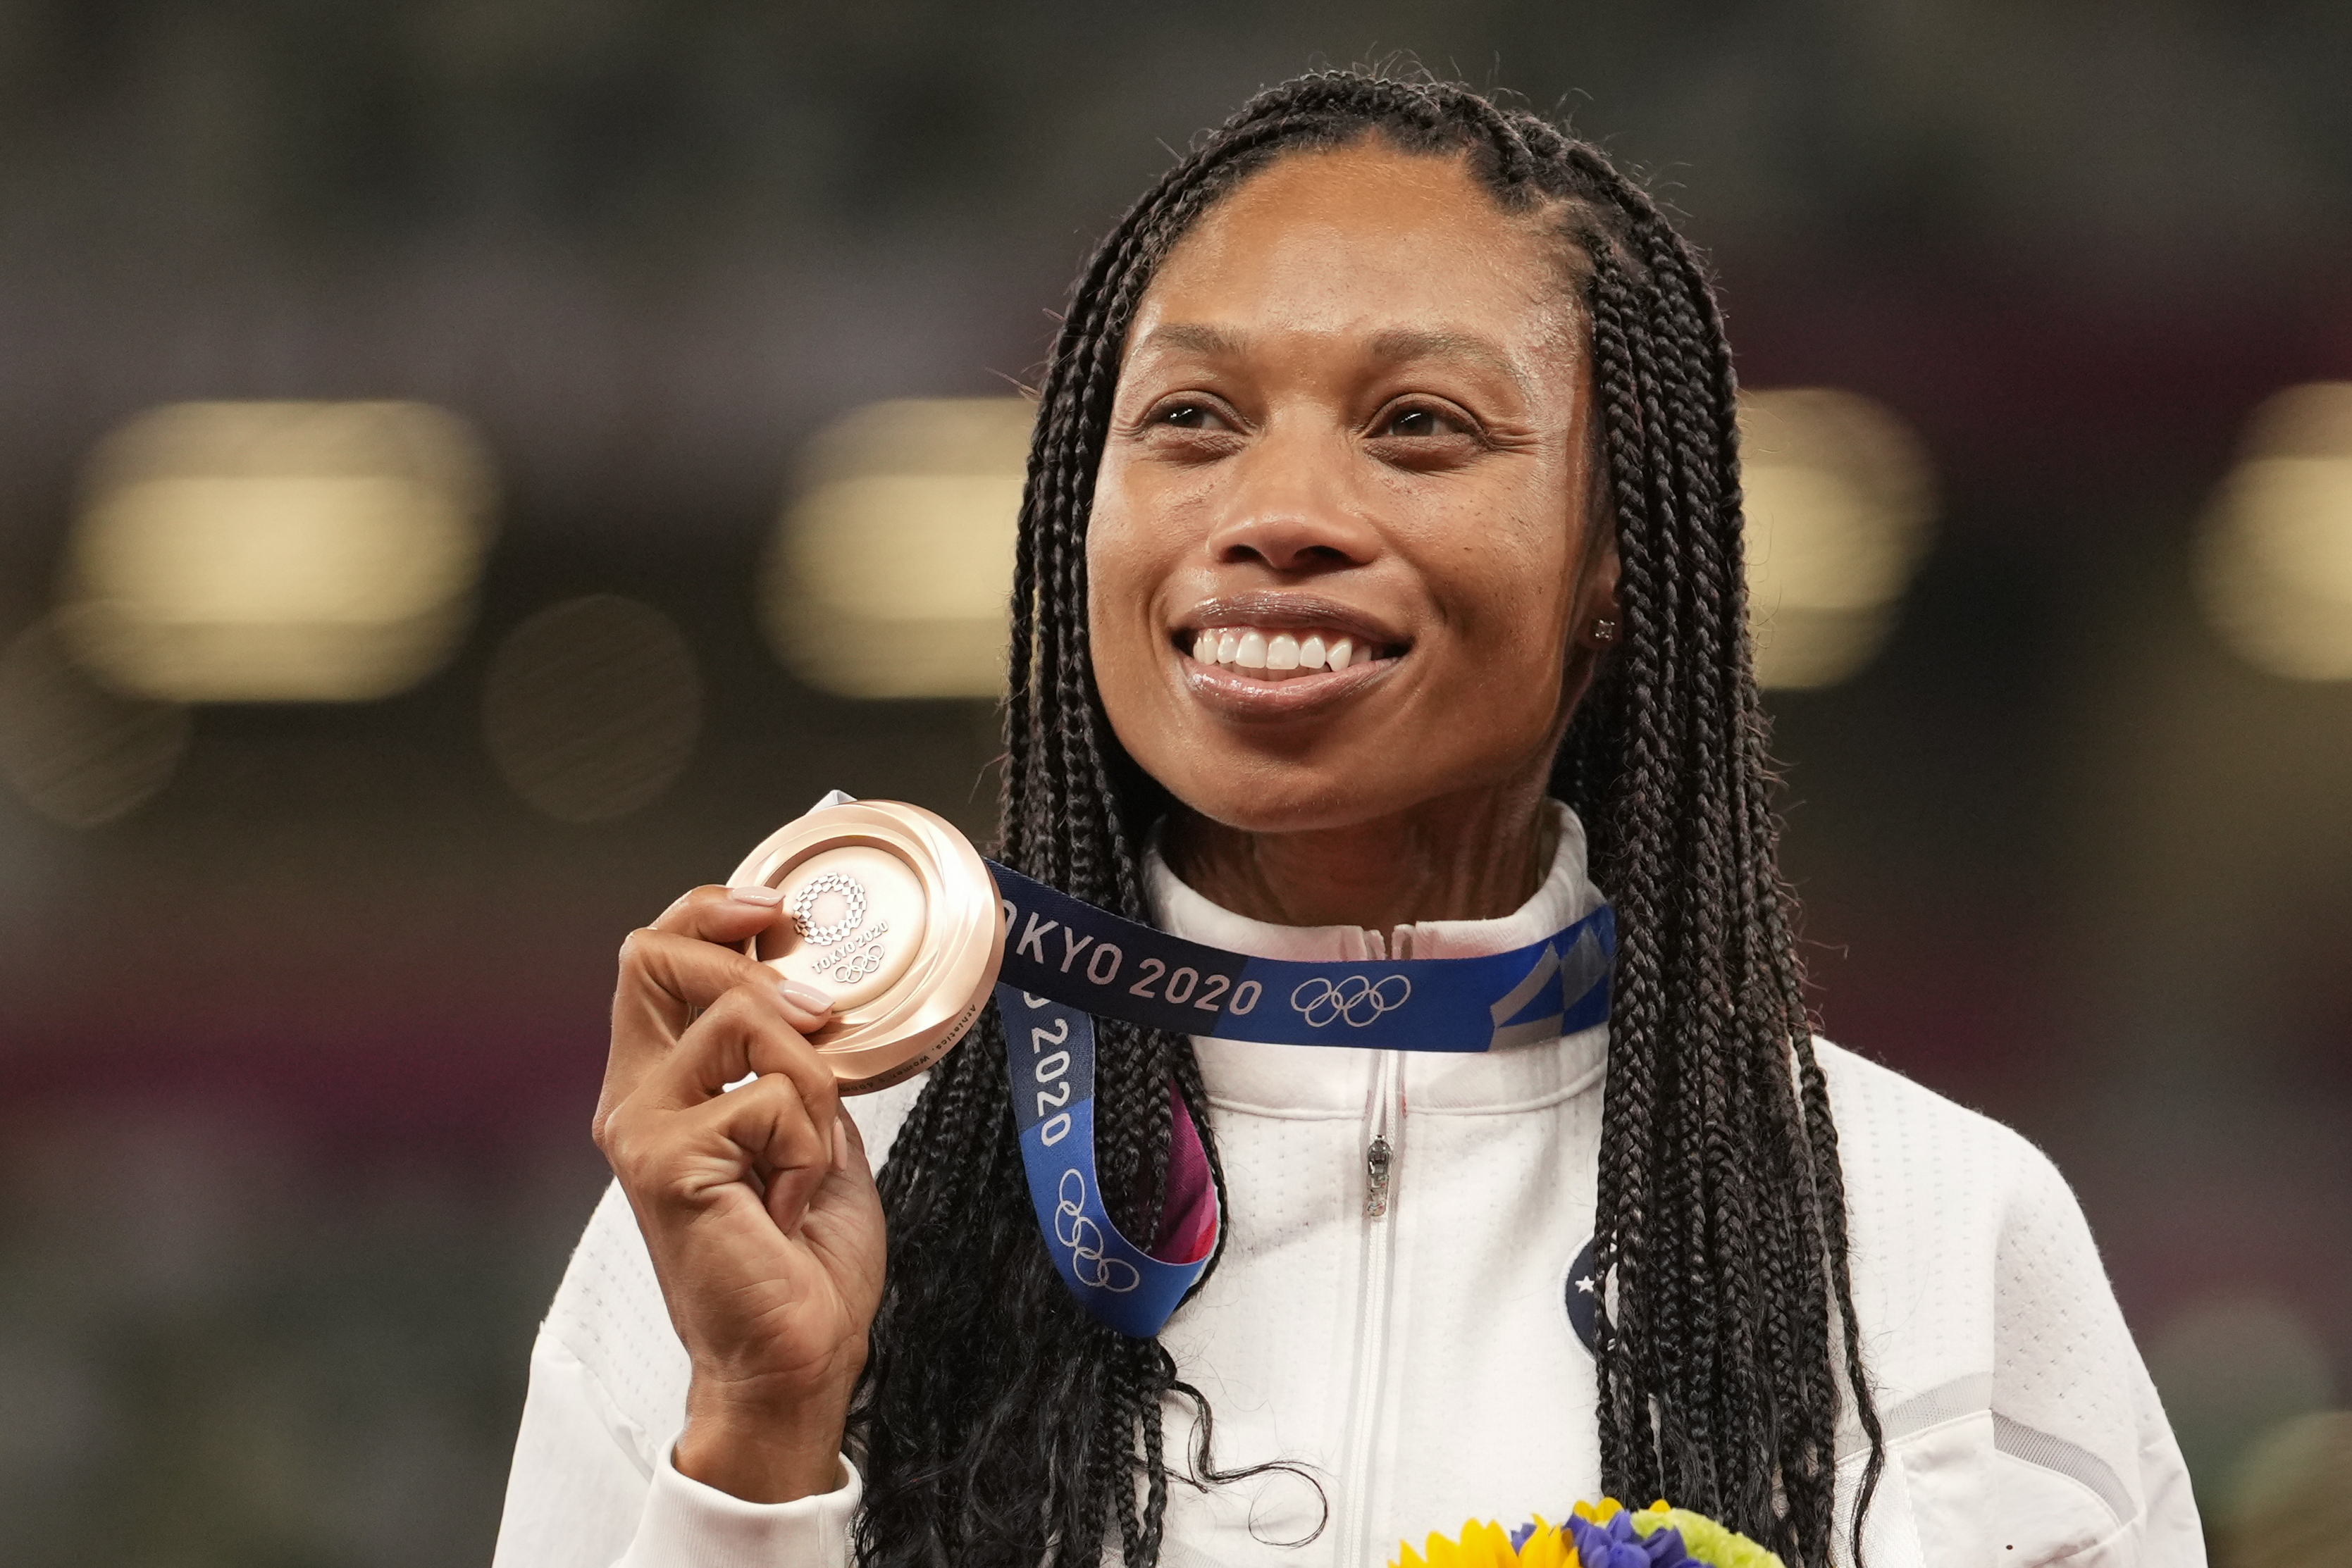 Bronze medalist Allyson Felix, of the United States, poses during the medal ceremony for the women’s 400-meter run.